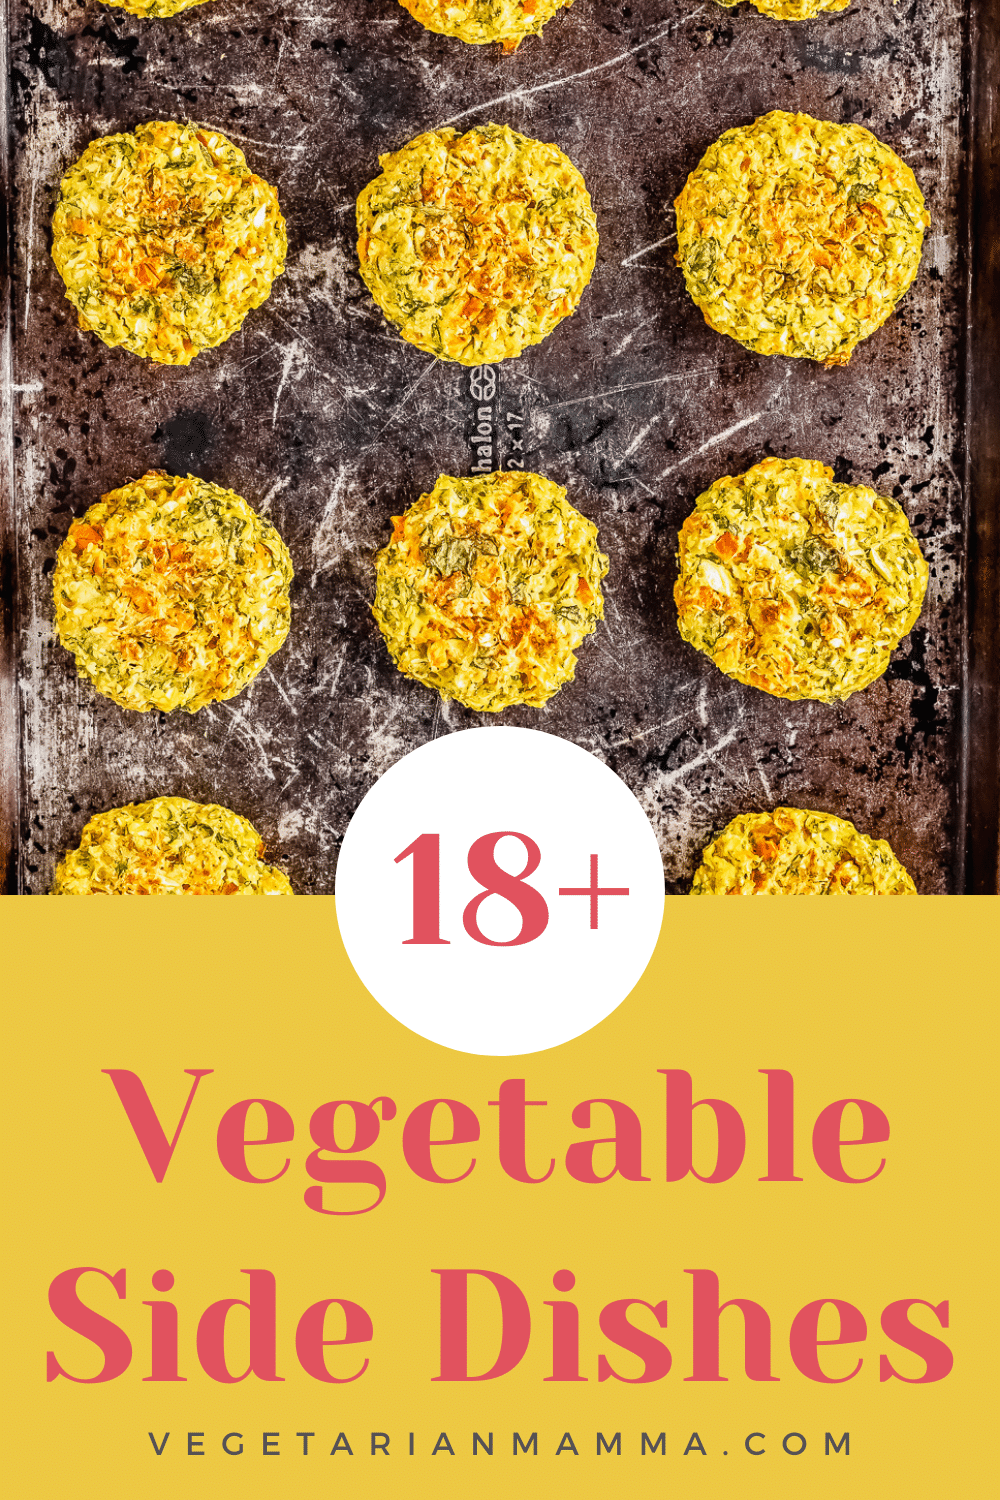 18 + Vegetable Side Dishes is the text overlay. Pictureed worn old cookie sheet with yellow zucchini patties/fritters on it